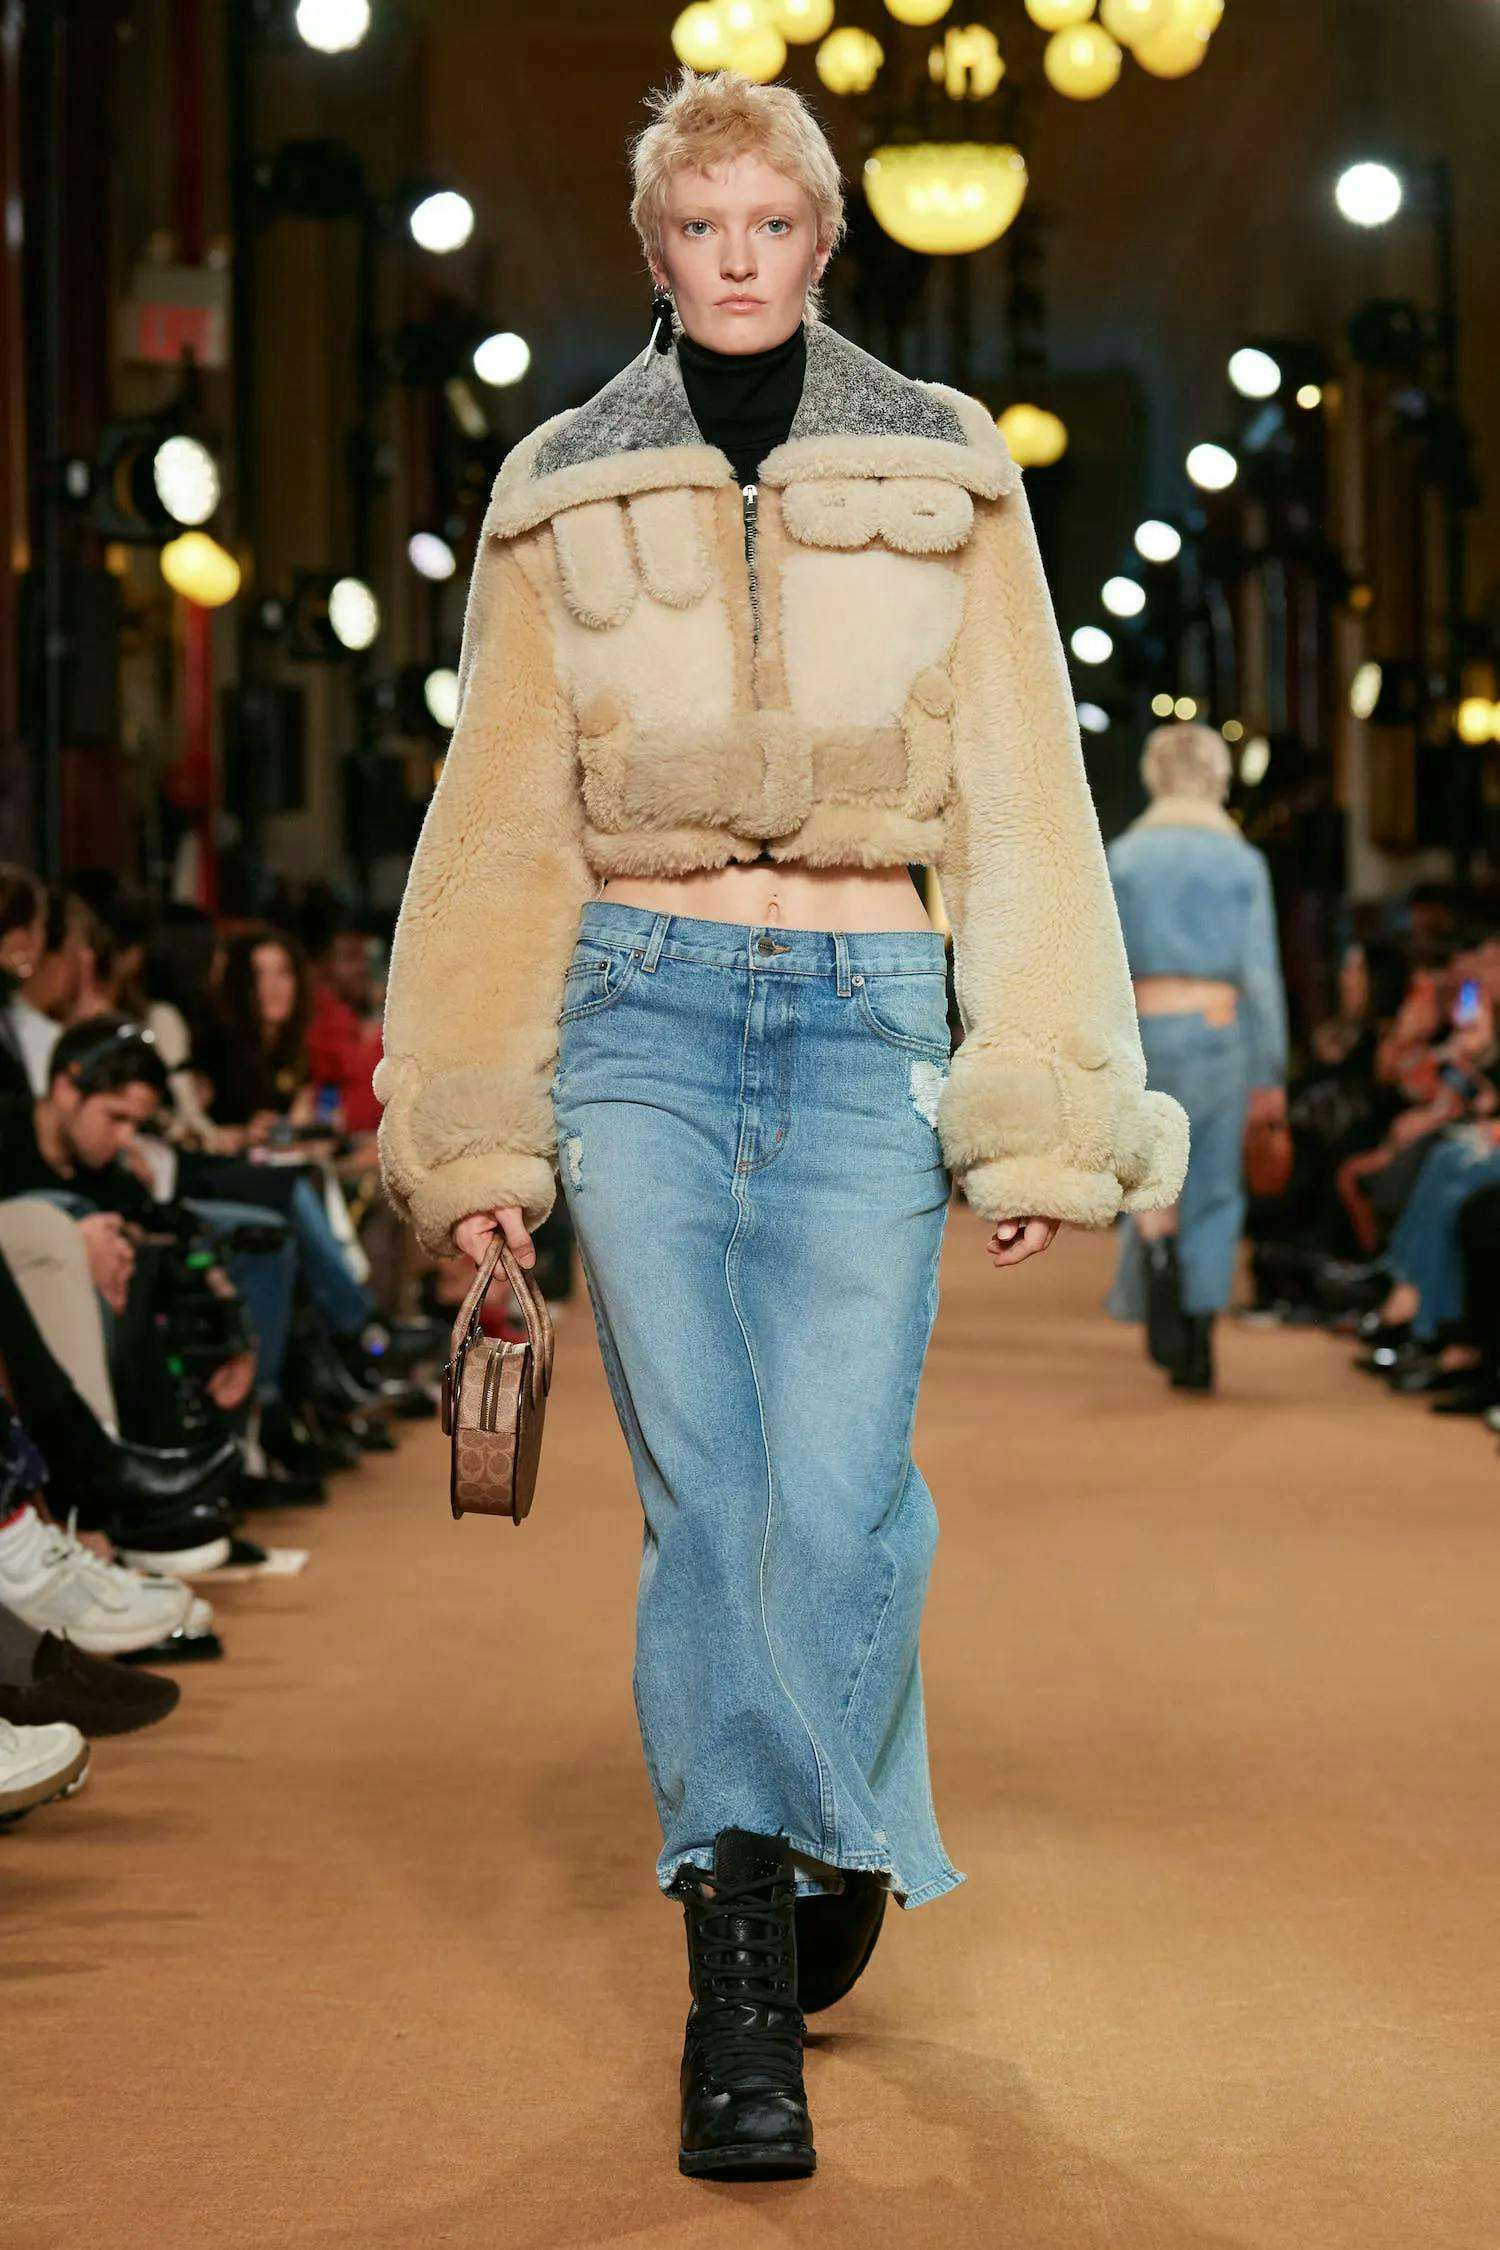 A model in a shearling jacket and denim maxi skirt.